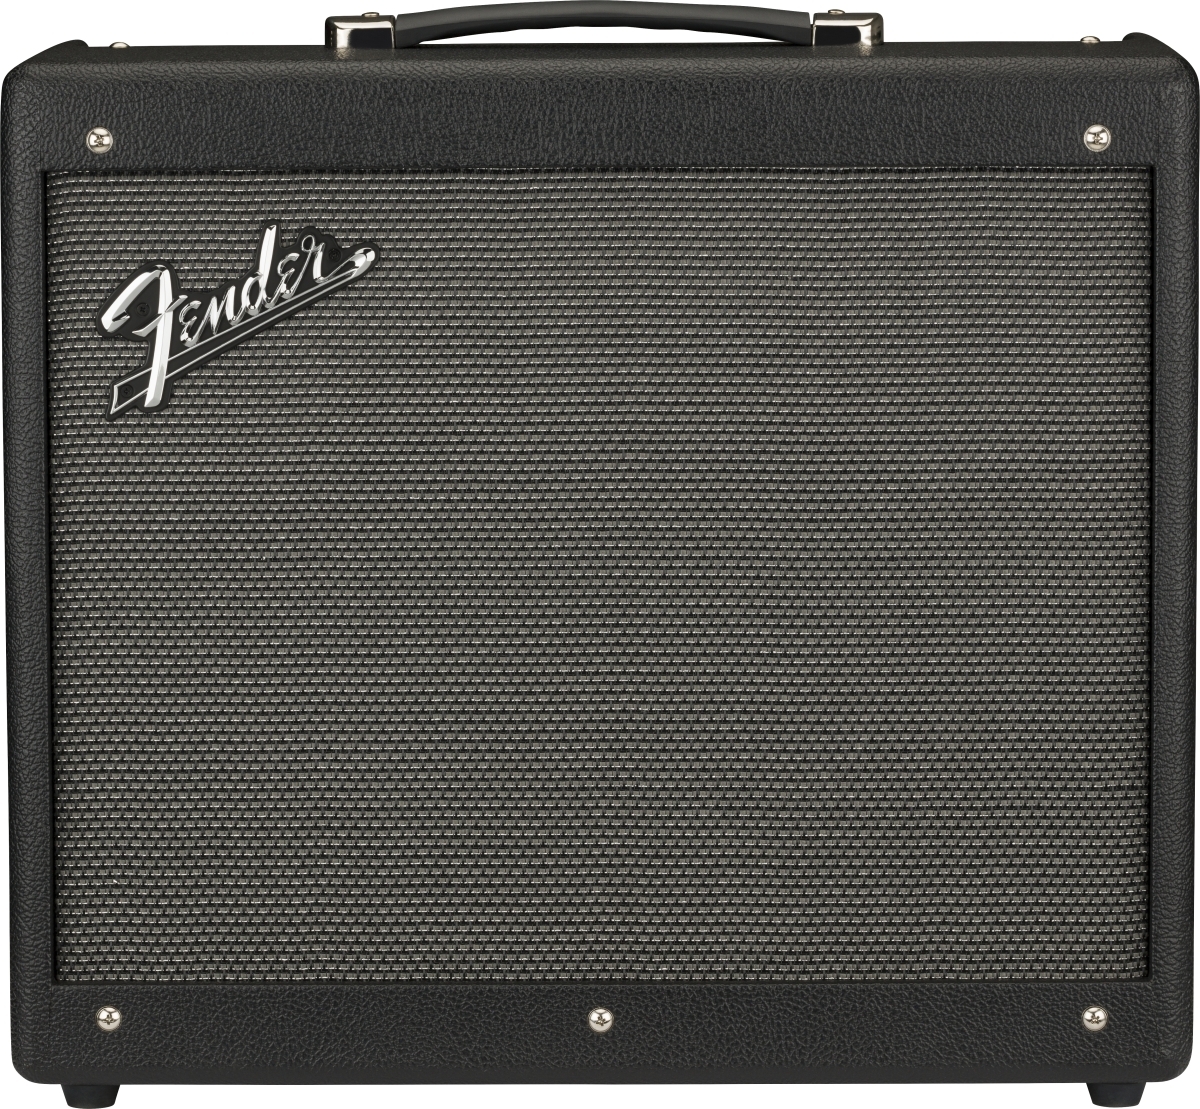 Fender Mustang Gtx 50 1x12 50w - Electric guitar combo amp - Main picture